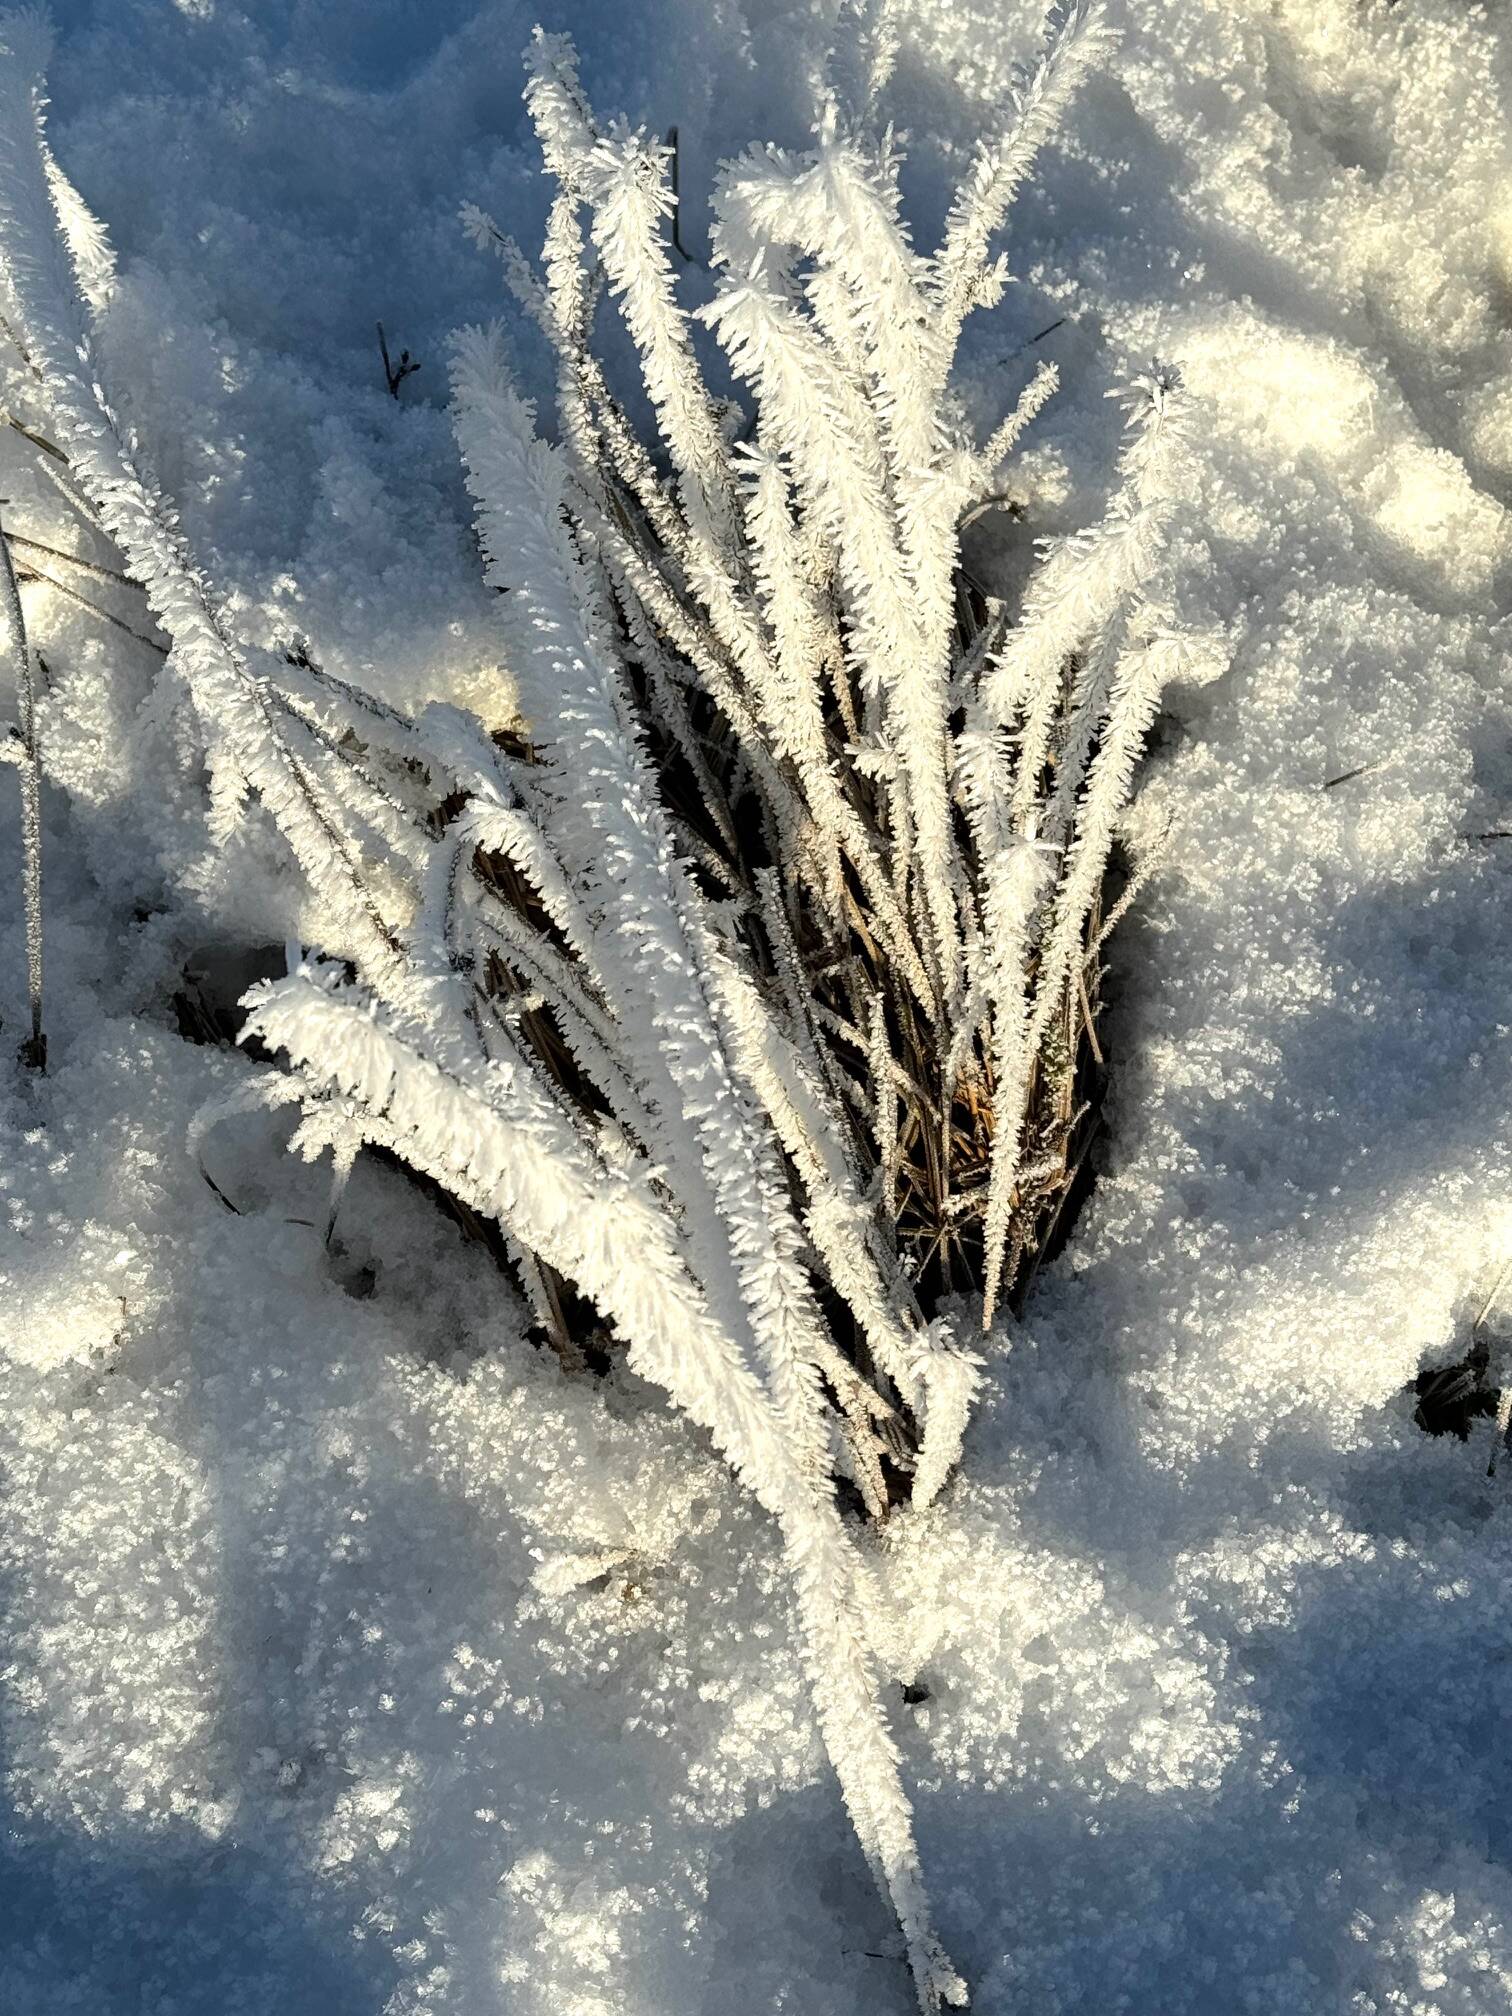 Photo by Denise Carroll
Meadow grass covered in rime waiting for spring on Jan. 6.